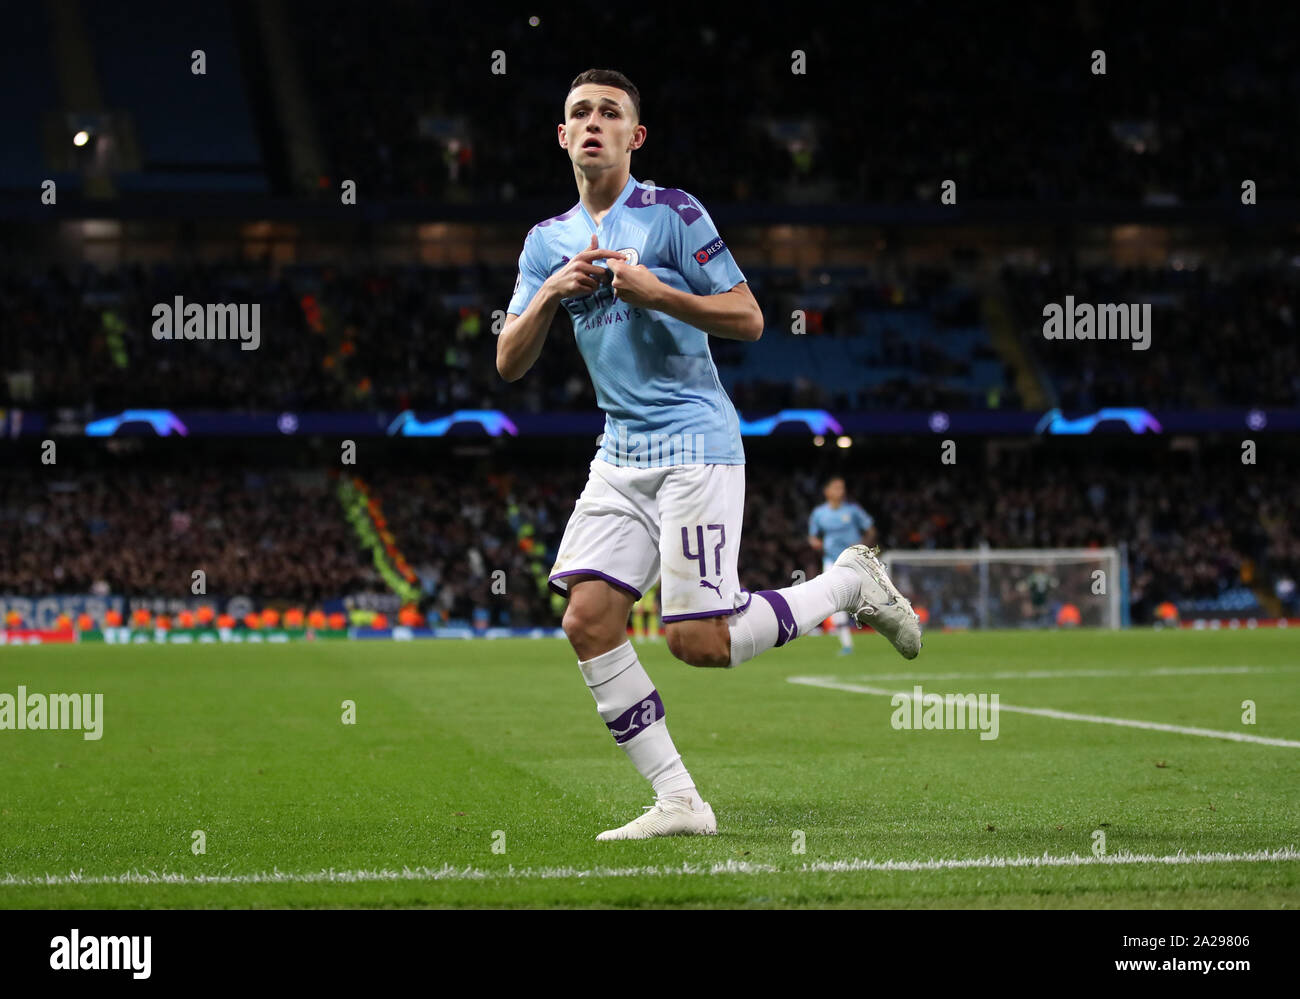 Manchester City's Phil Foden celebrates scoring his side's second goal of the game during the UEFA Champions League match at the Etihad Stadium, Manchester. Stock Photo